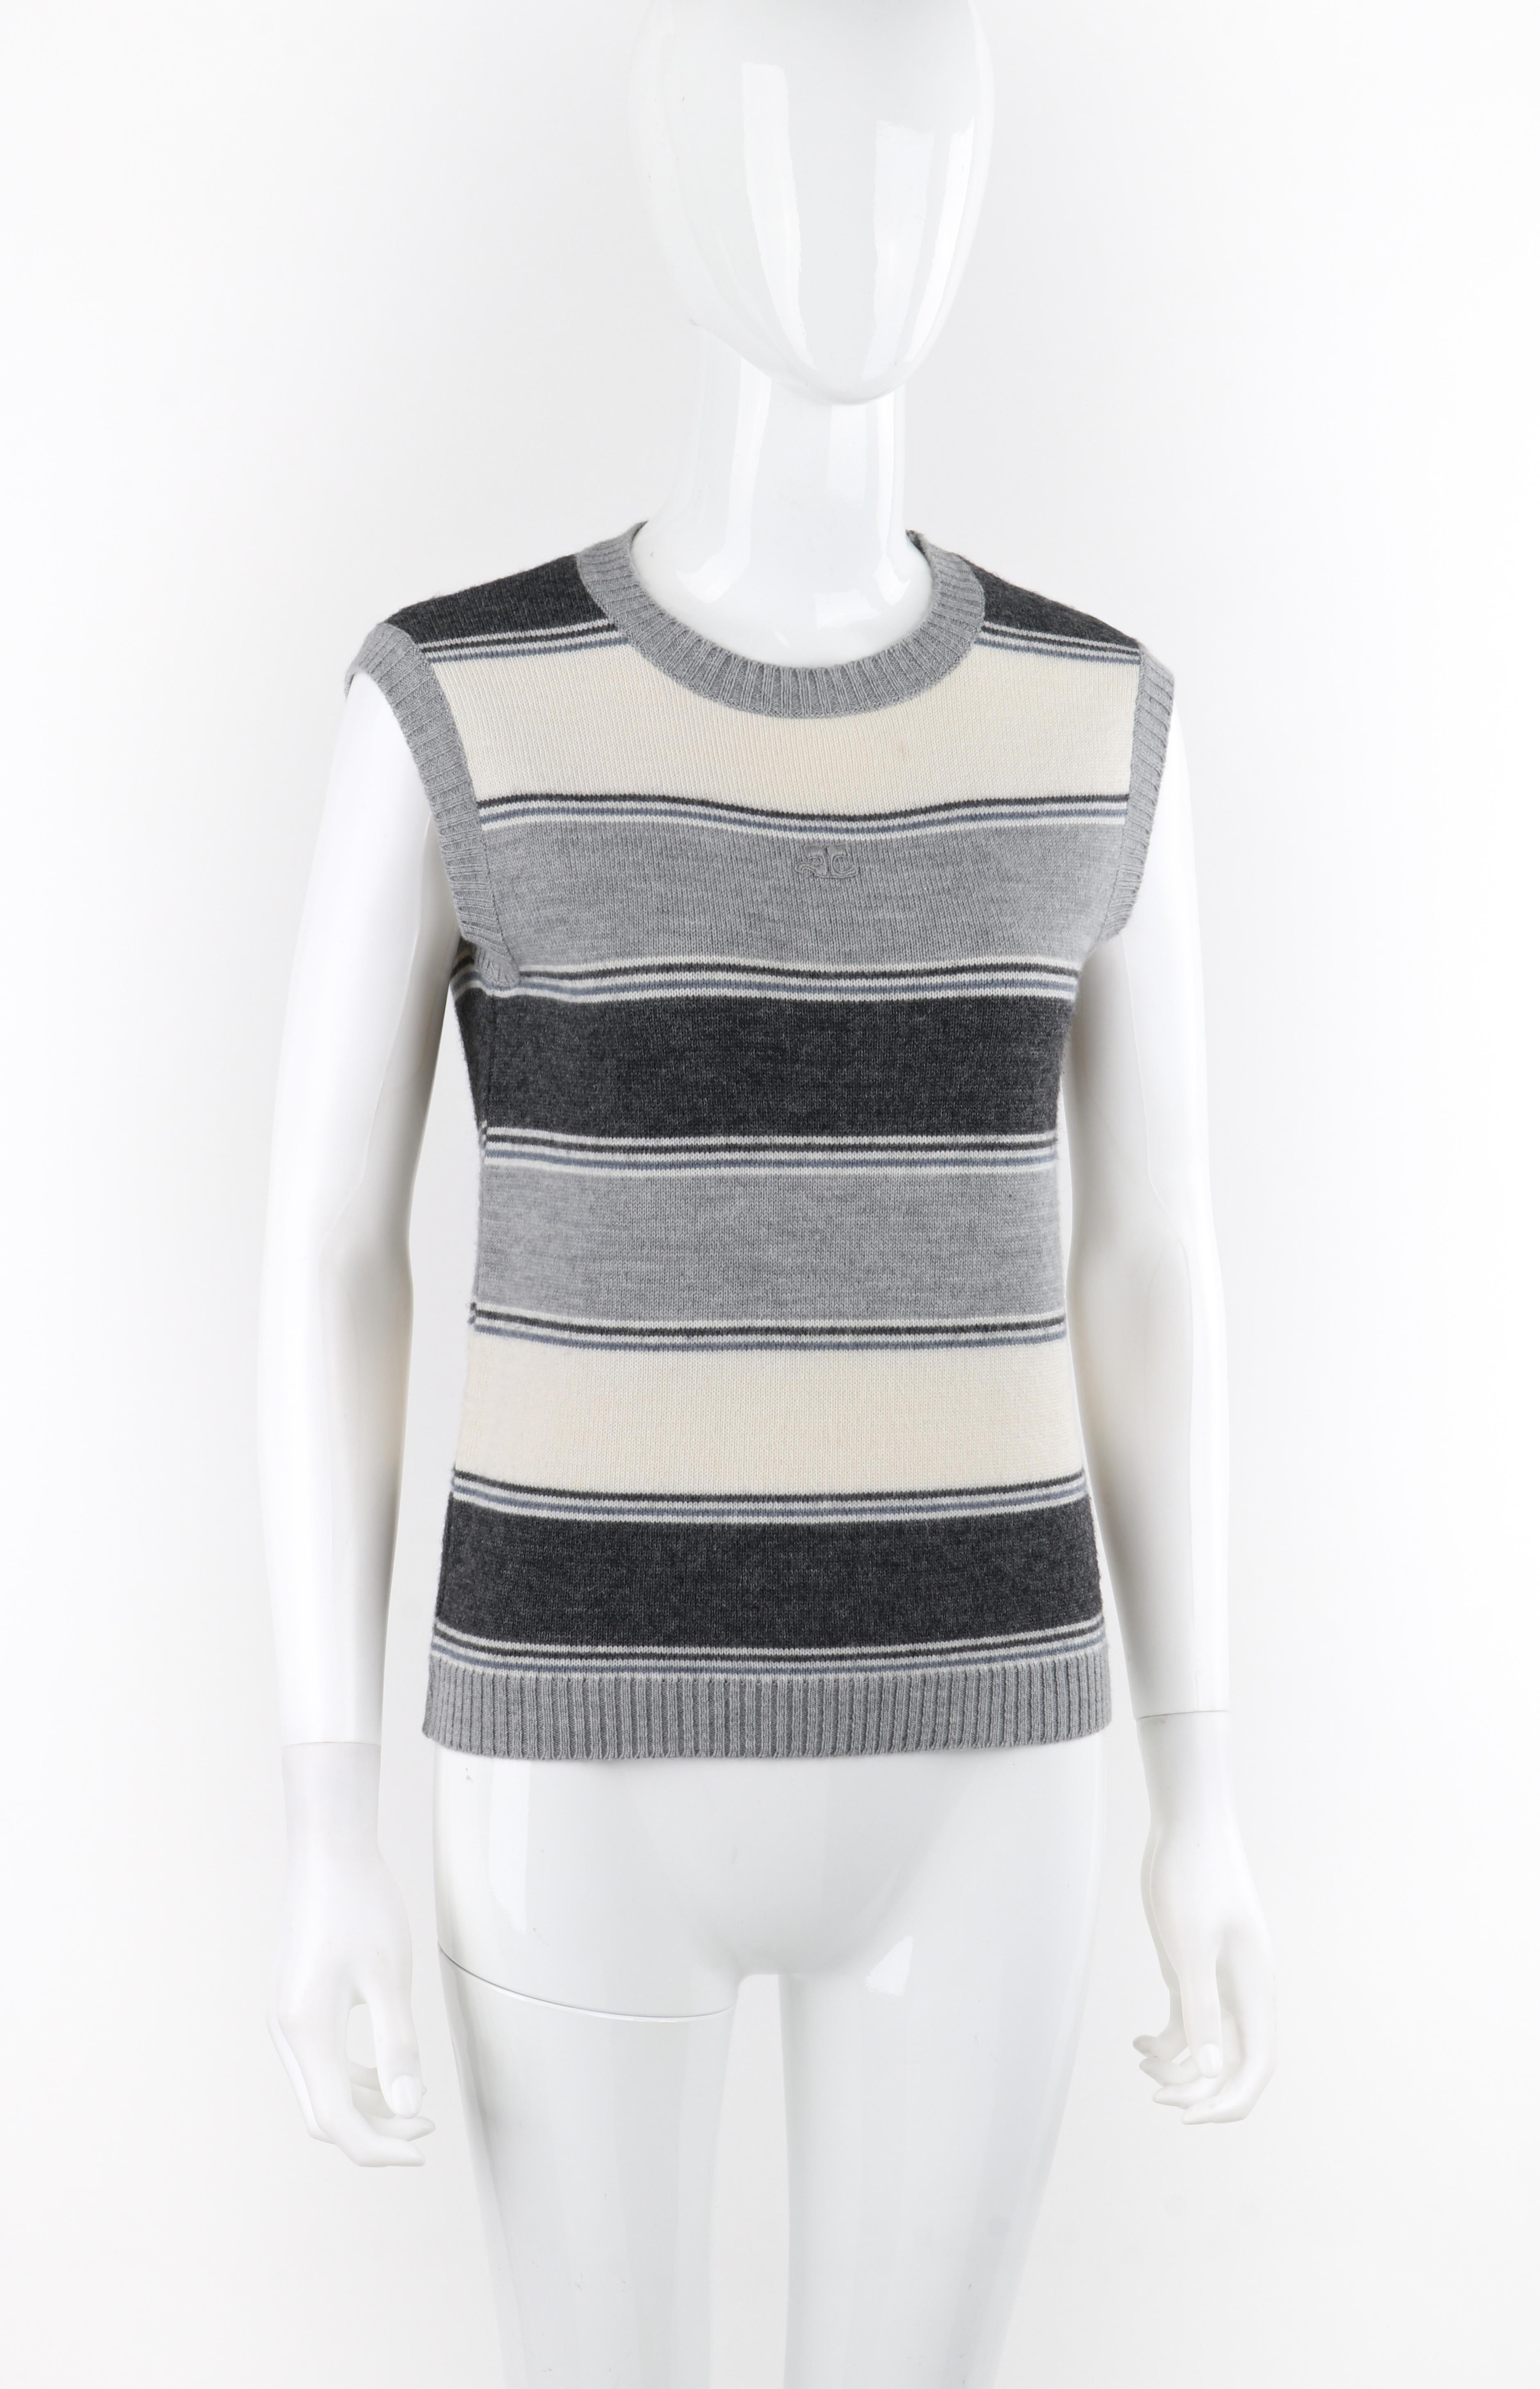 Women's COURREGES c.1970's Gray Striped Wool Knit Sleeveless Pullover Sweater Vest Top